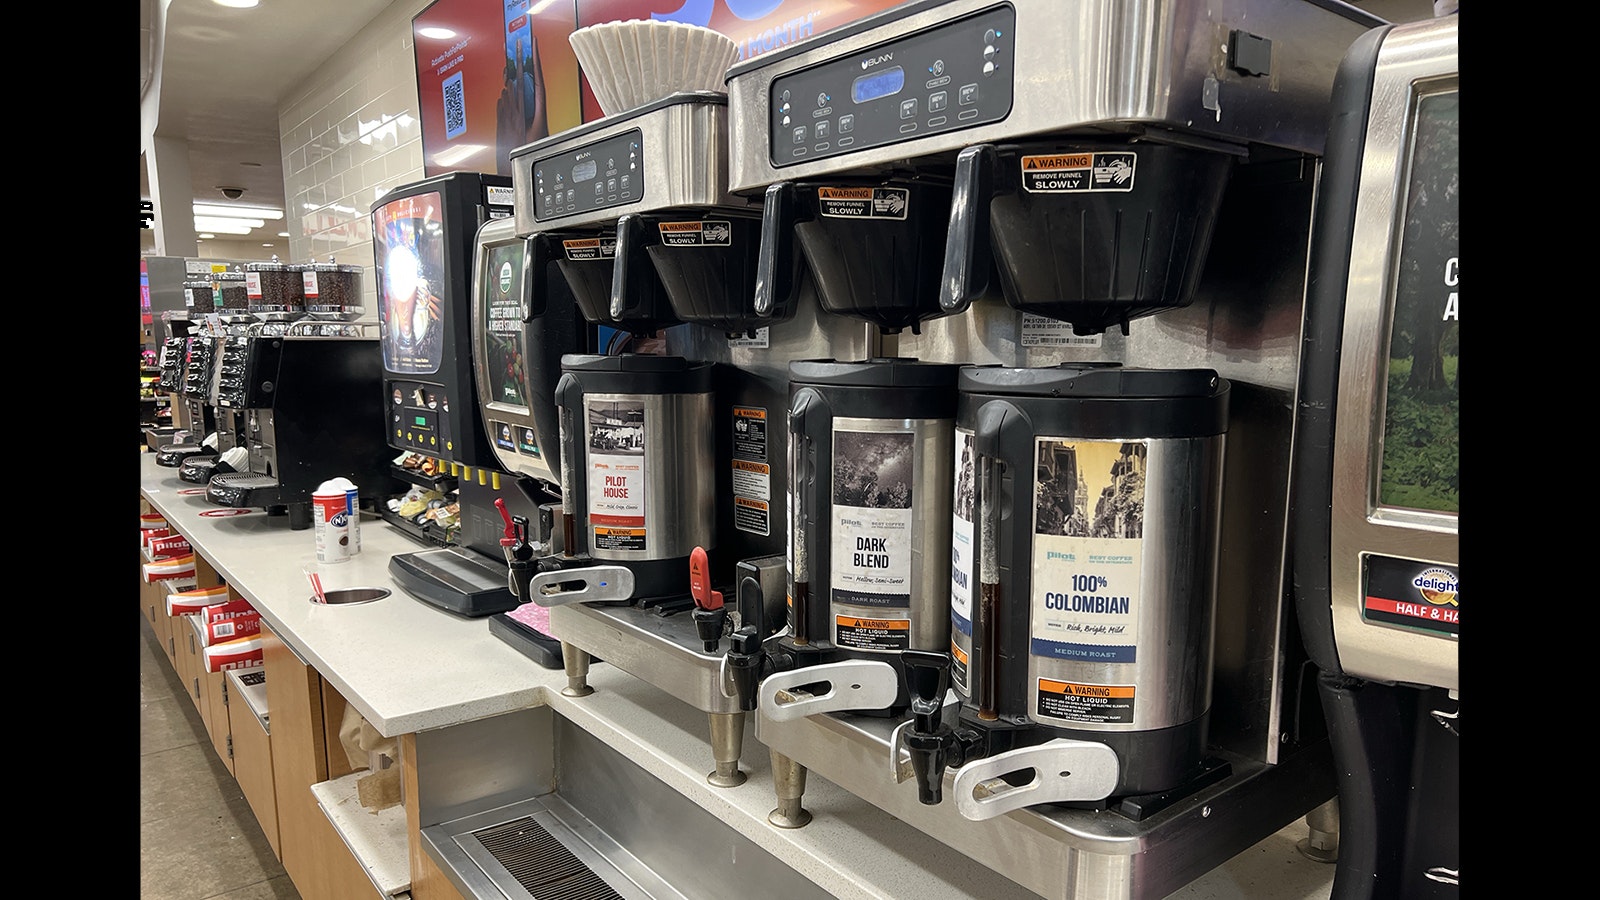 Proclaiming it has the "best coffee on the interstate," an entire wall is dedicated to coffee at the Flying J truck stop in Cheyenne.